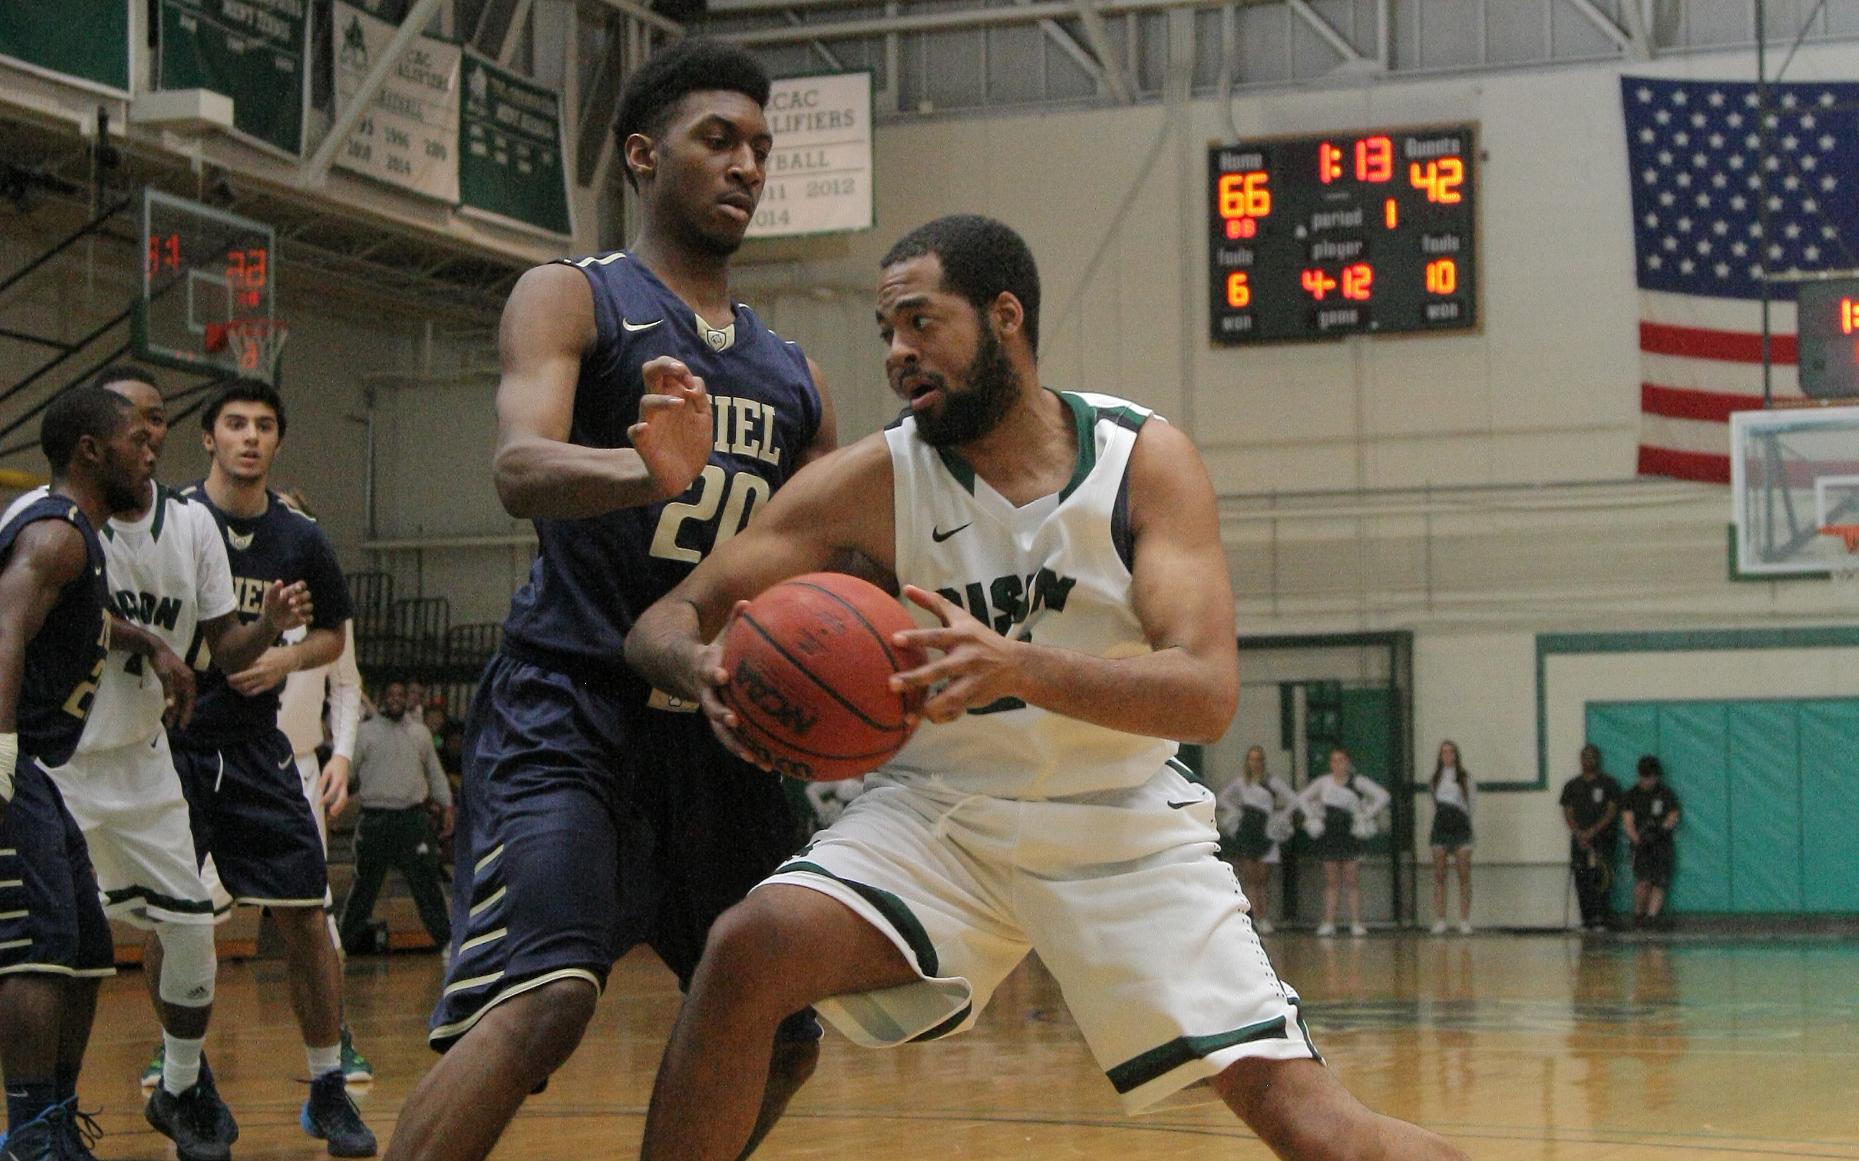 Bethany Men’s Hoops Leads Wire-to-Wire Over Thiel